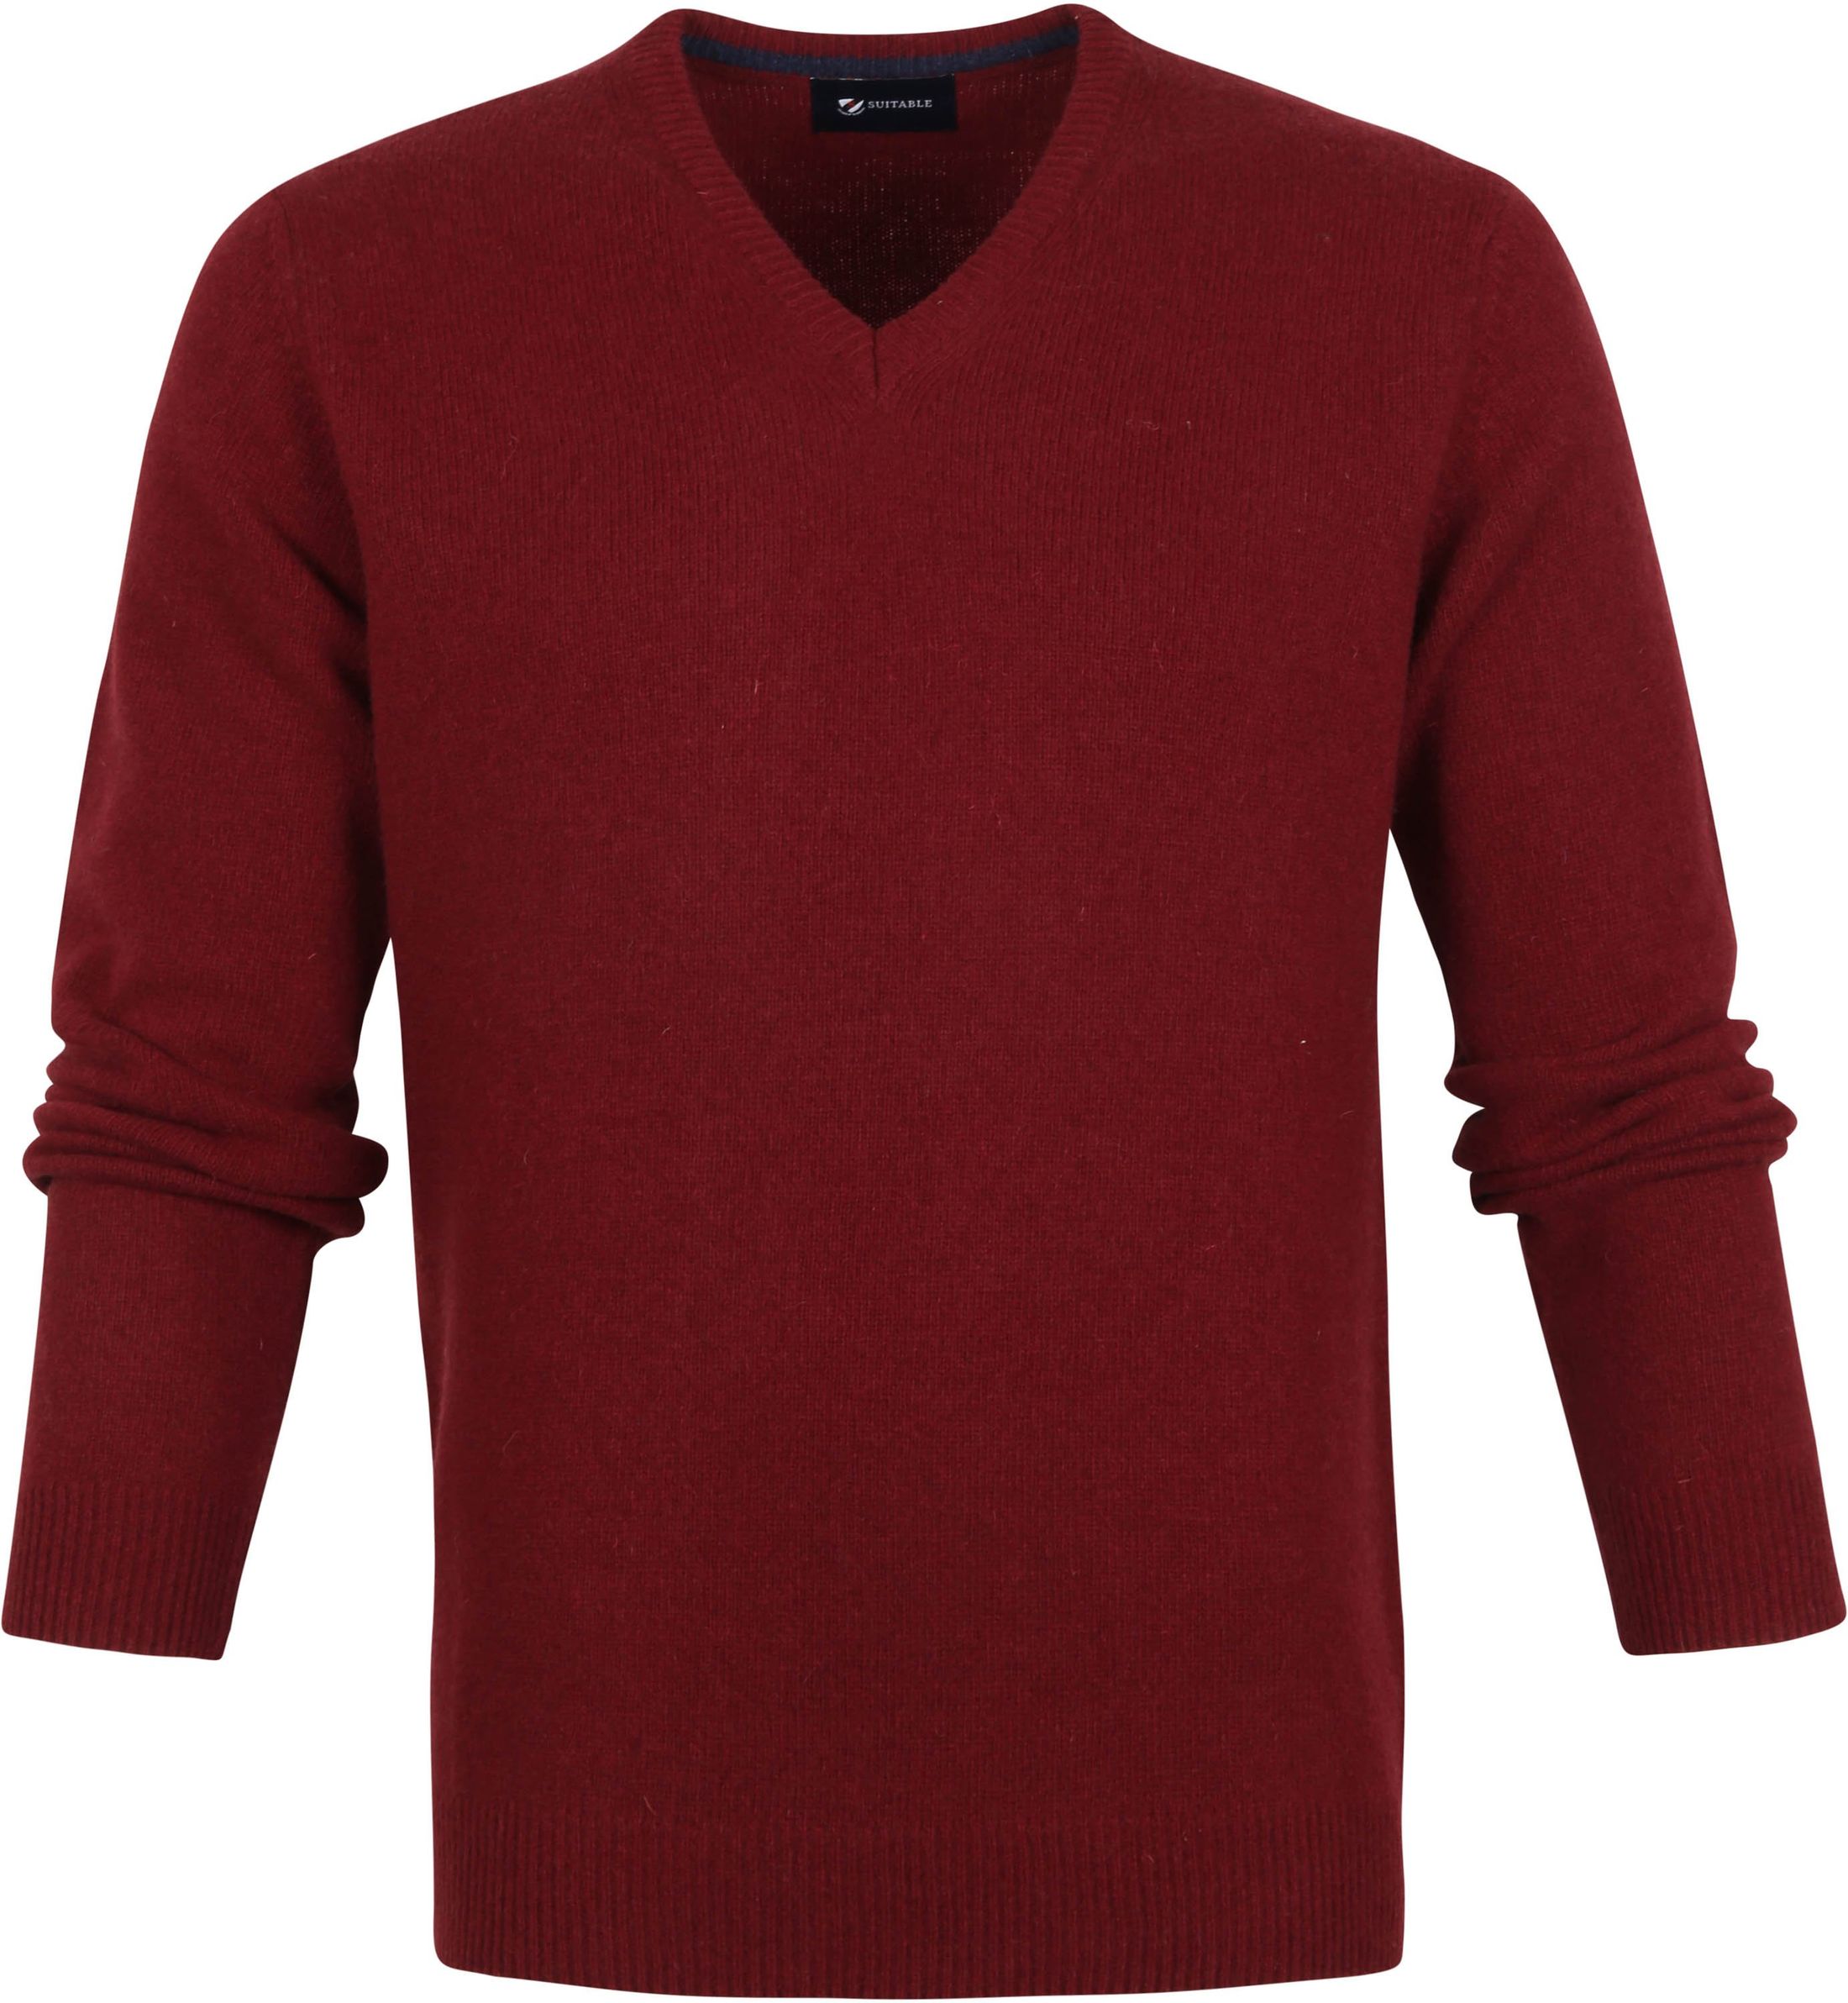 Suitable Lambswool Pullover V-Neck Bordeaux Burgundy size M